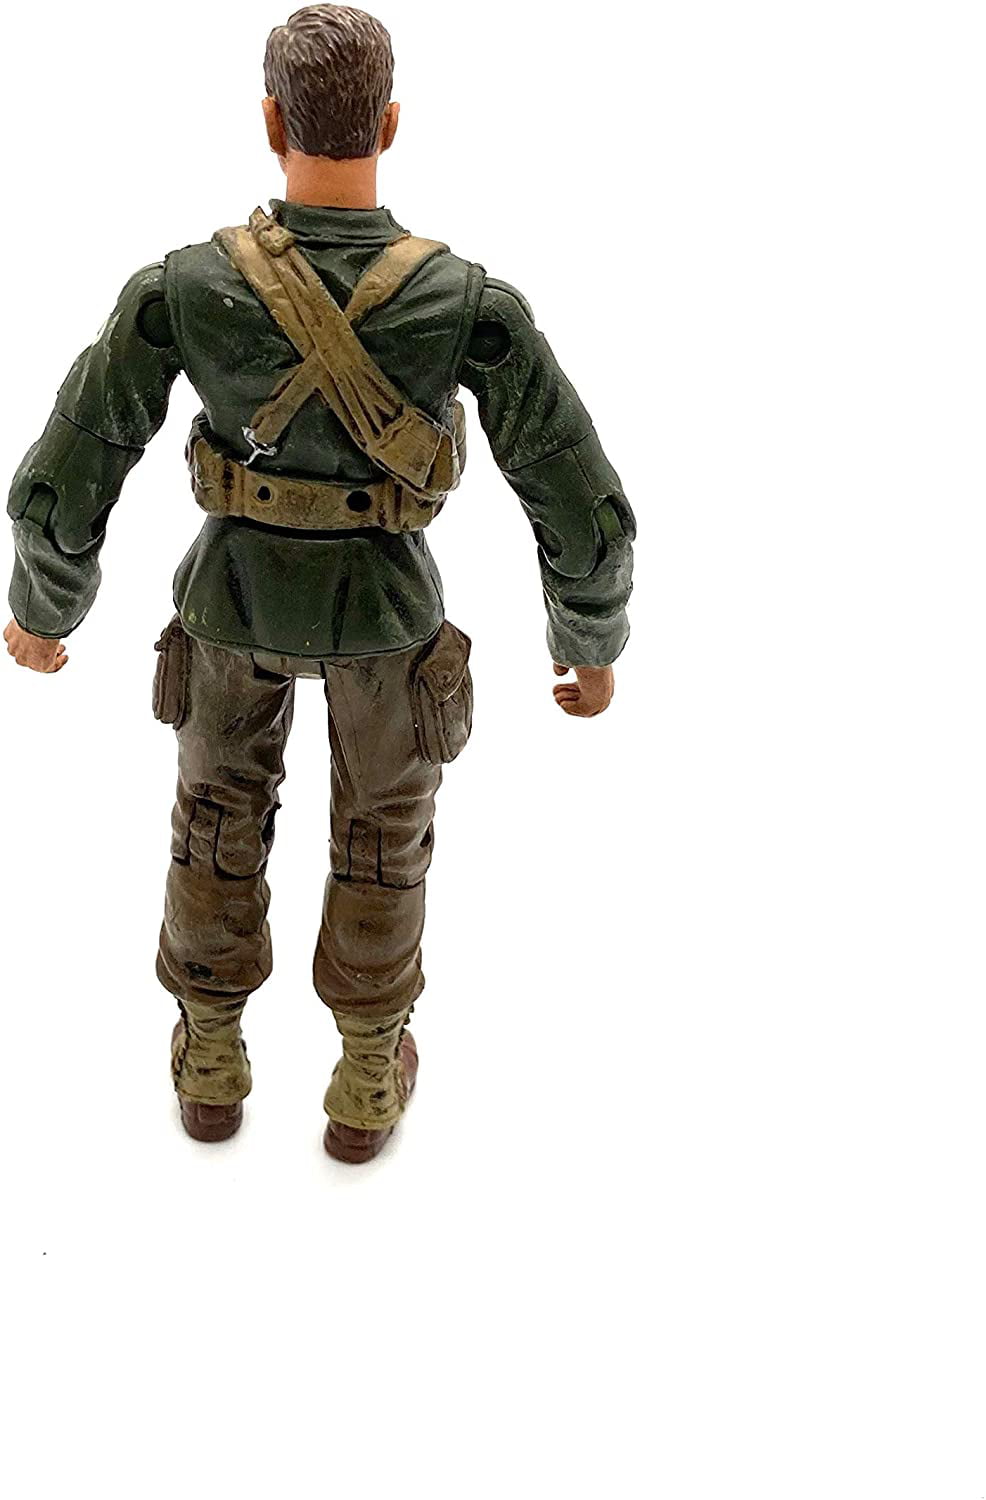 Details about   ☆ 1:32 Scale Unimax Toys Forces of Valor WWII US Army Infantryman Soldier Figure 